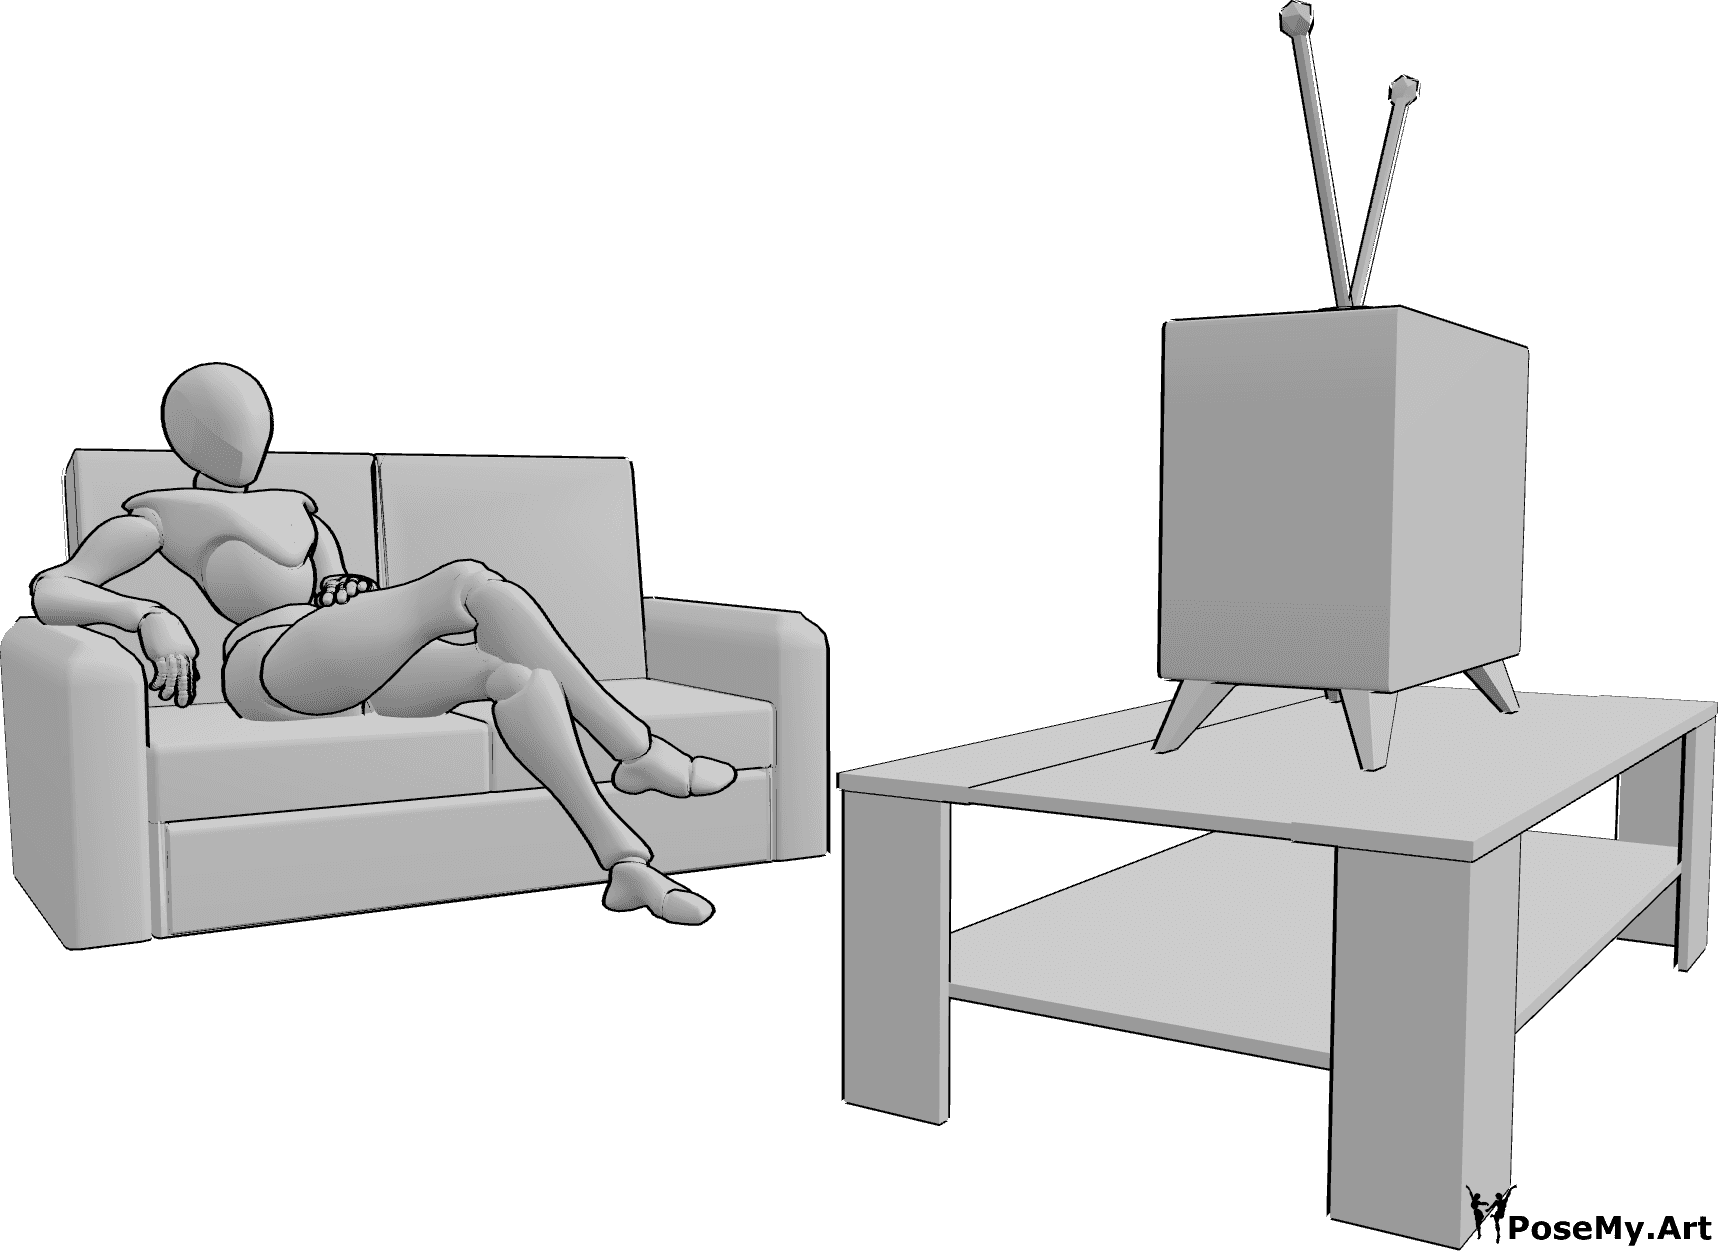 Pose Reference - Sofa watching TV pose - Female is sitting on the sofa with her legs crossed and watching TV